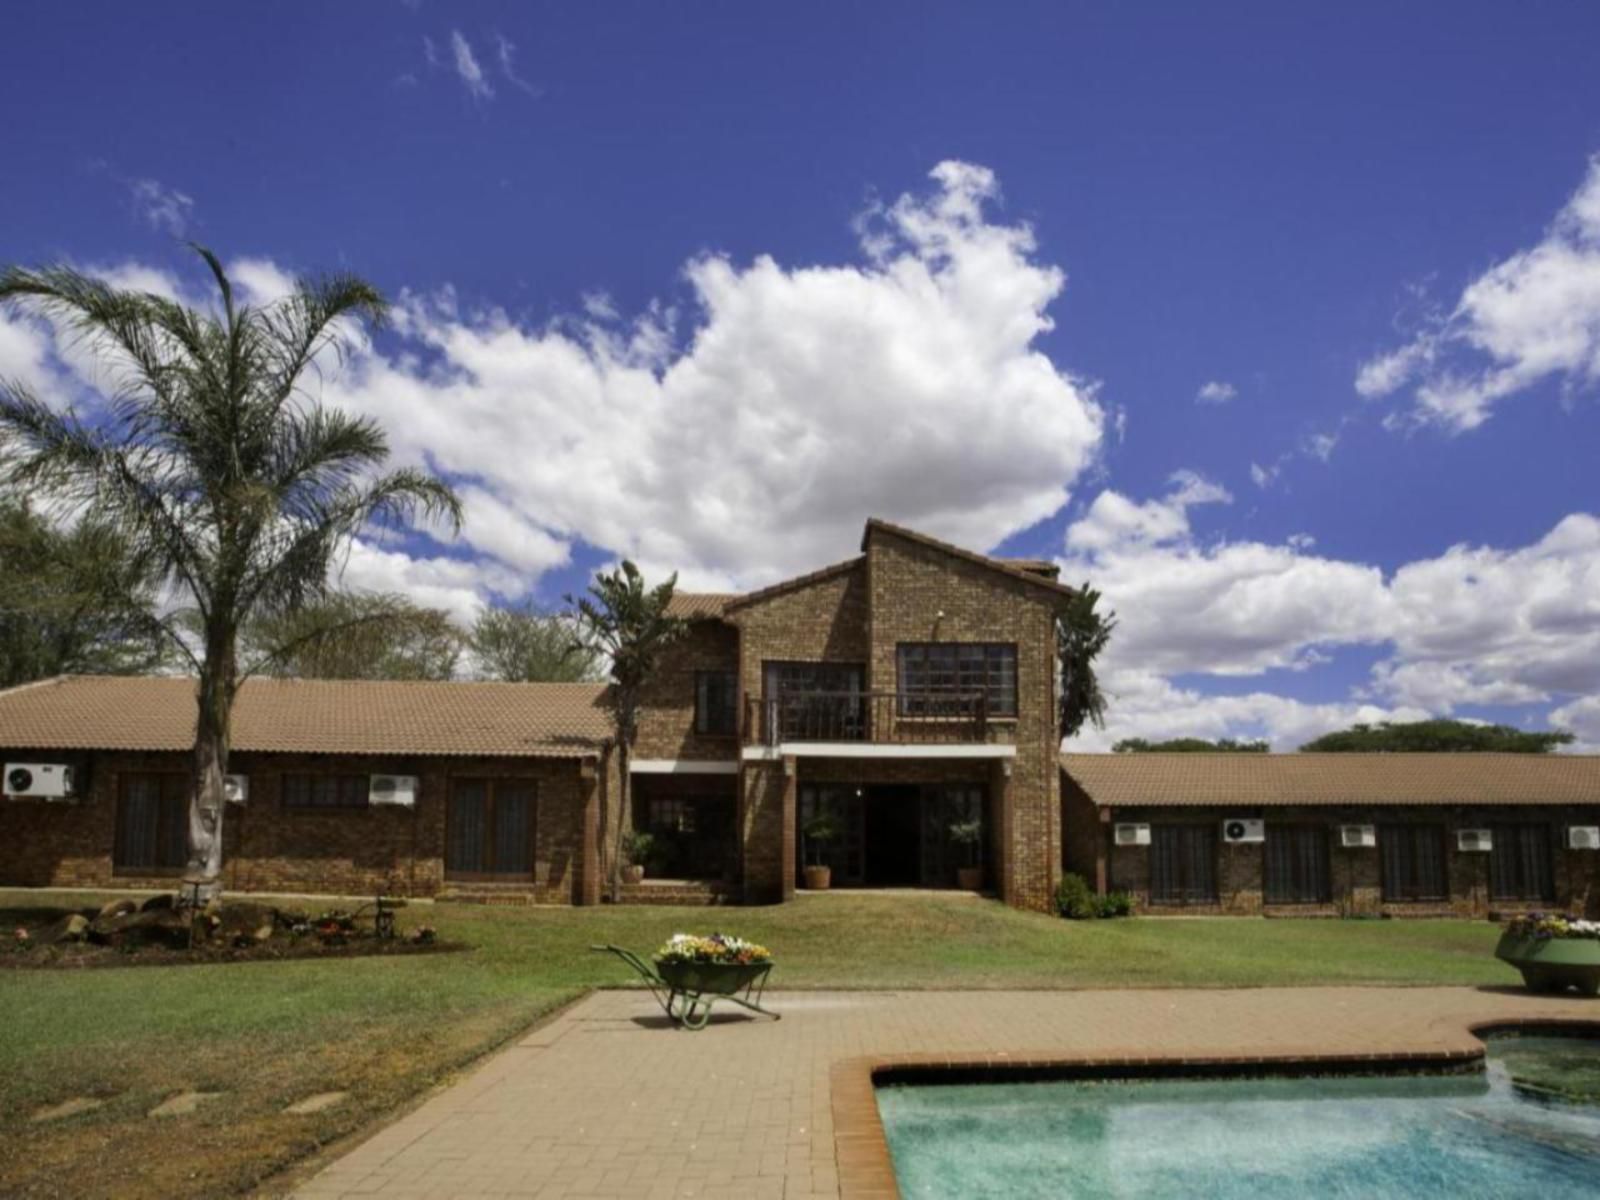 Peter S Guesthouse Equestria Pretoria Tshwane Gauteng South Africa Complementary Colors, House, Building, Architecture